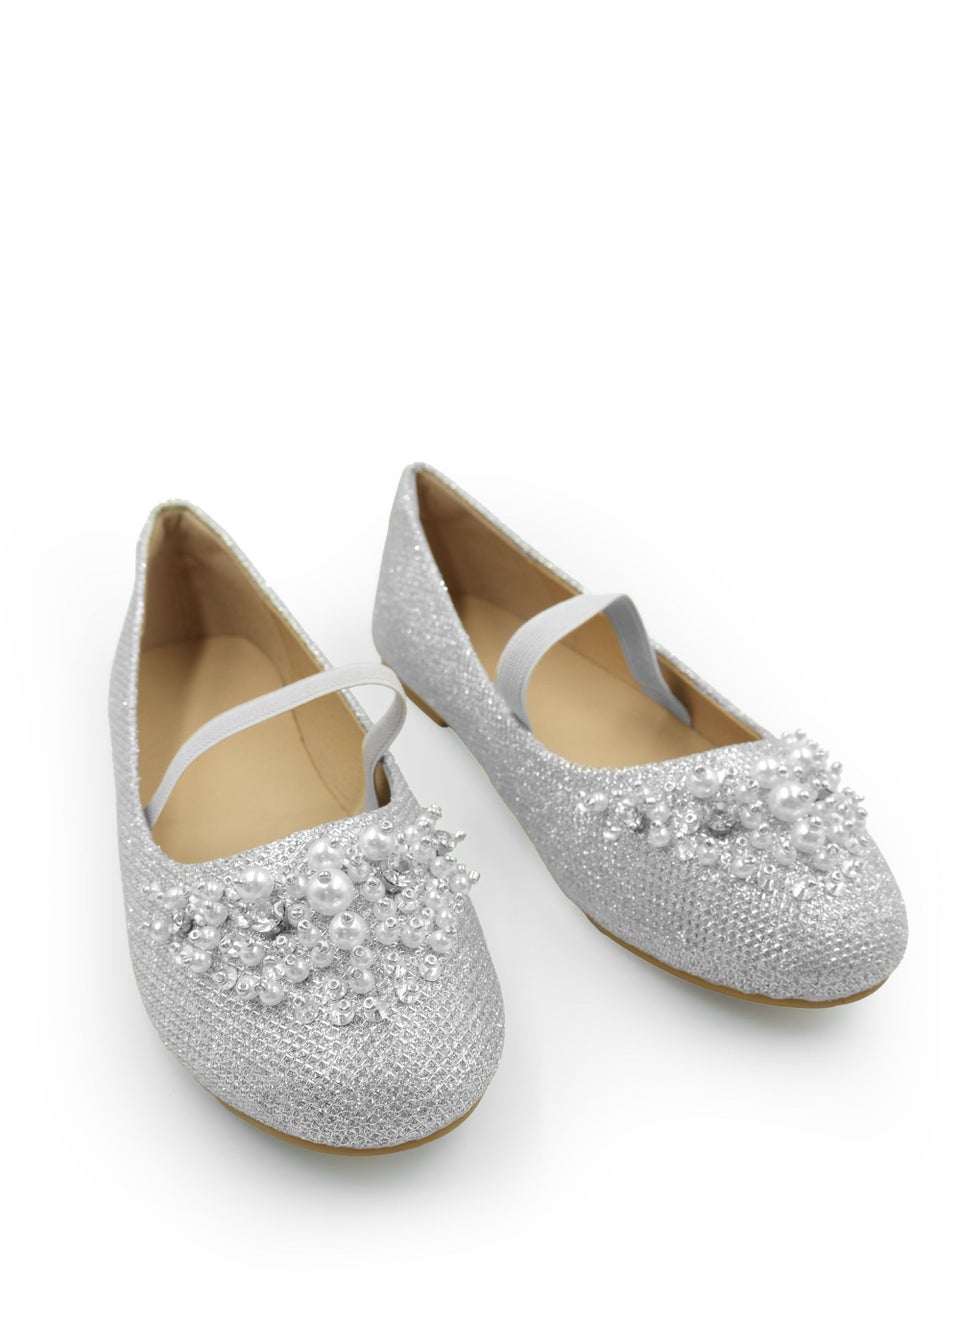 Where's That From Silver Libbie Kids Diamante Embellished Platform Shoes